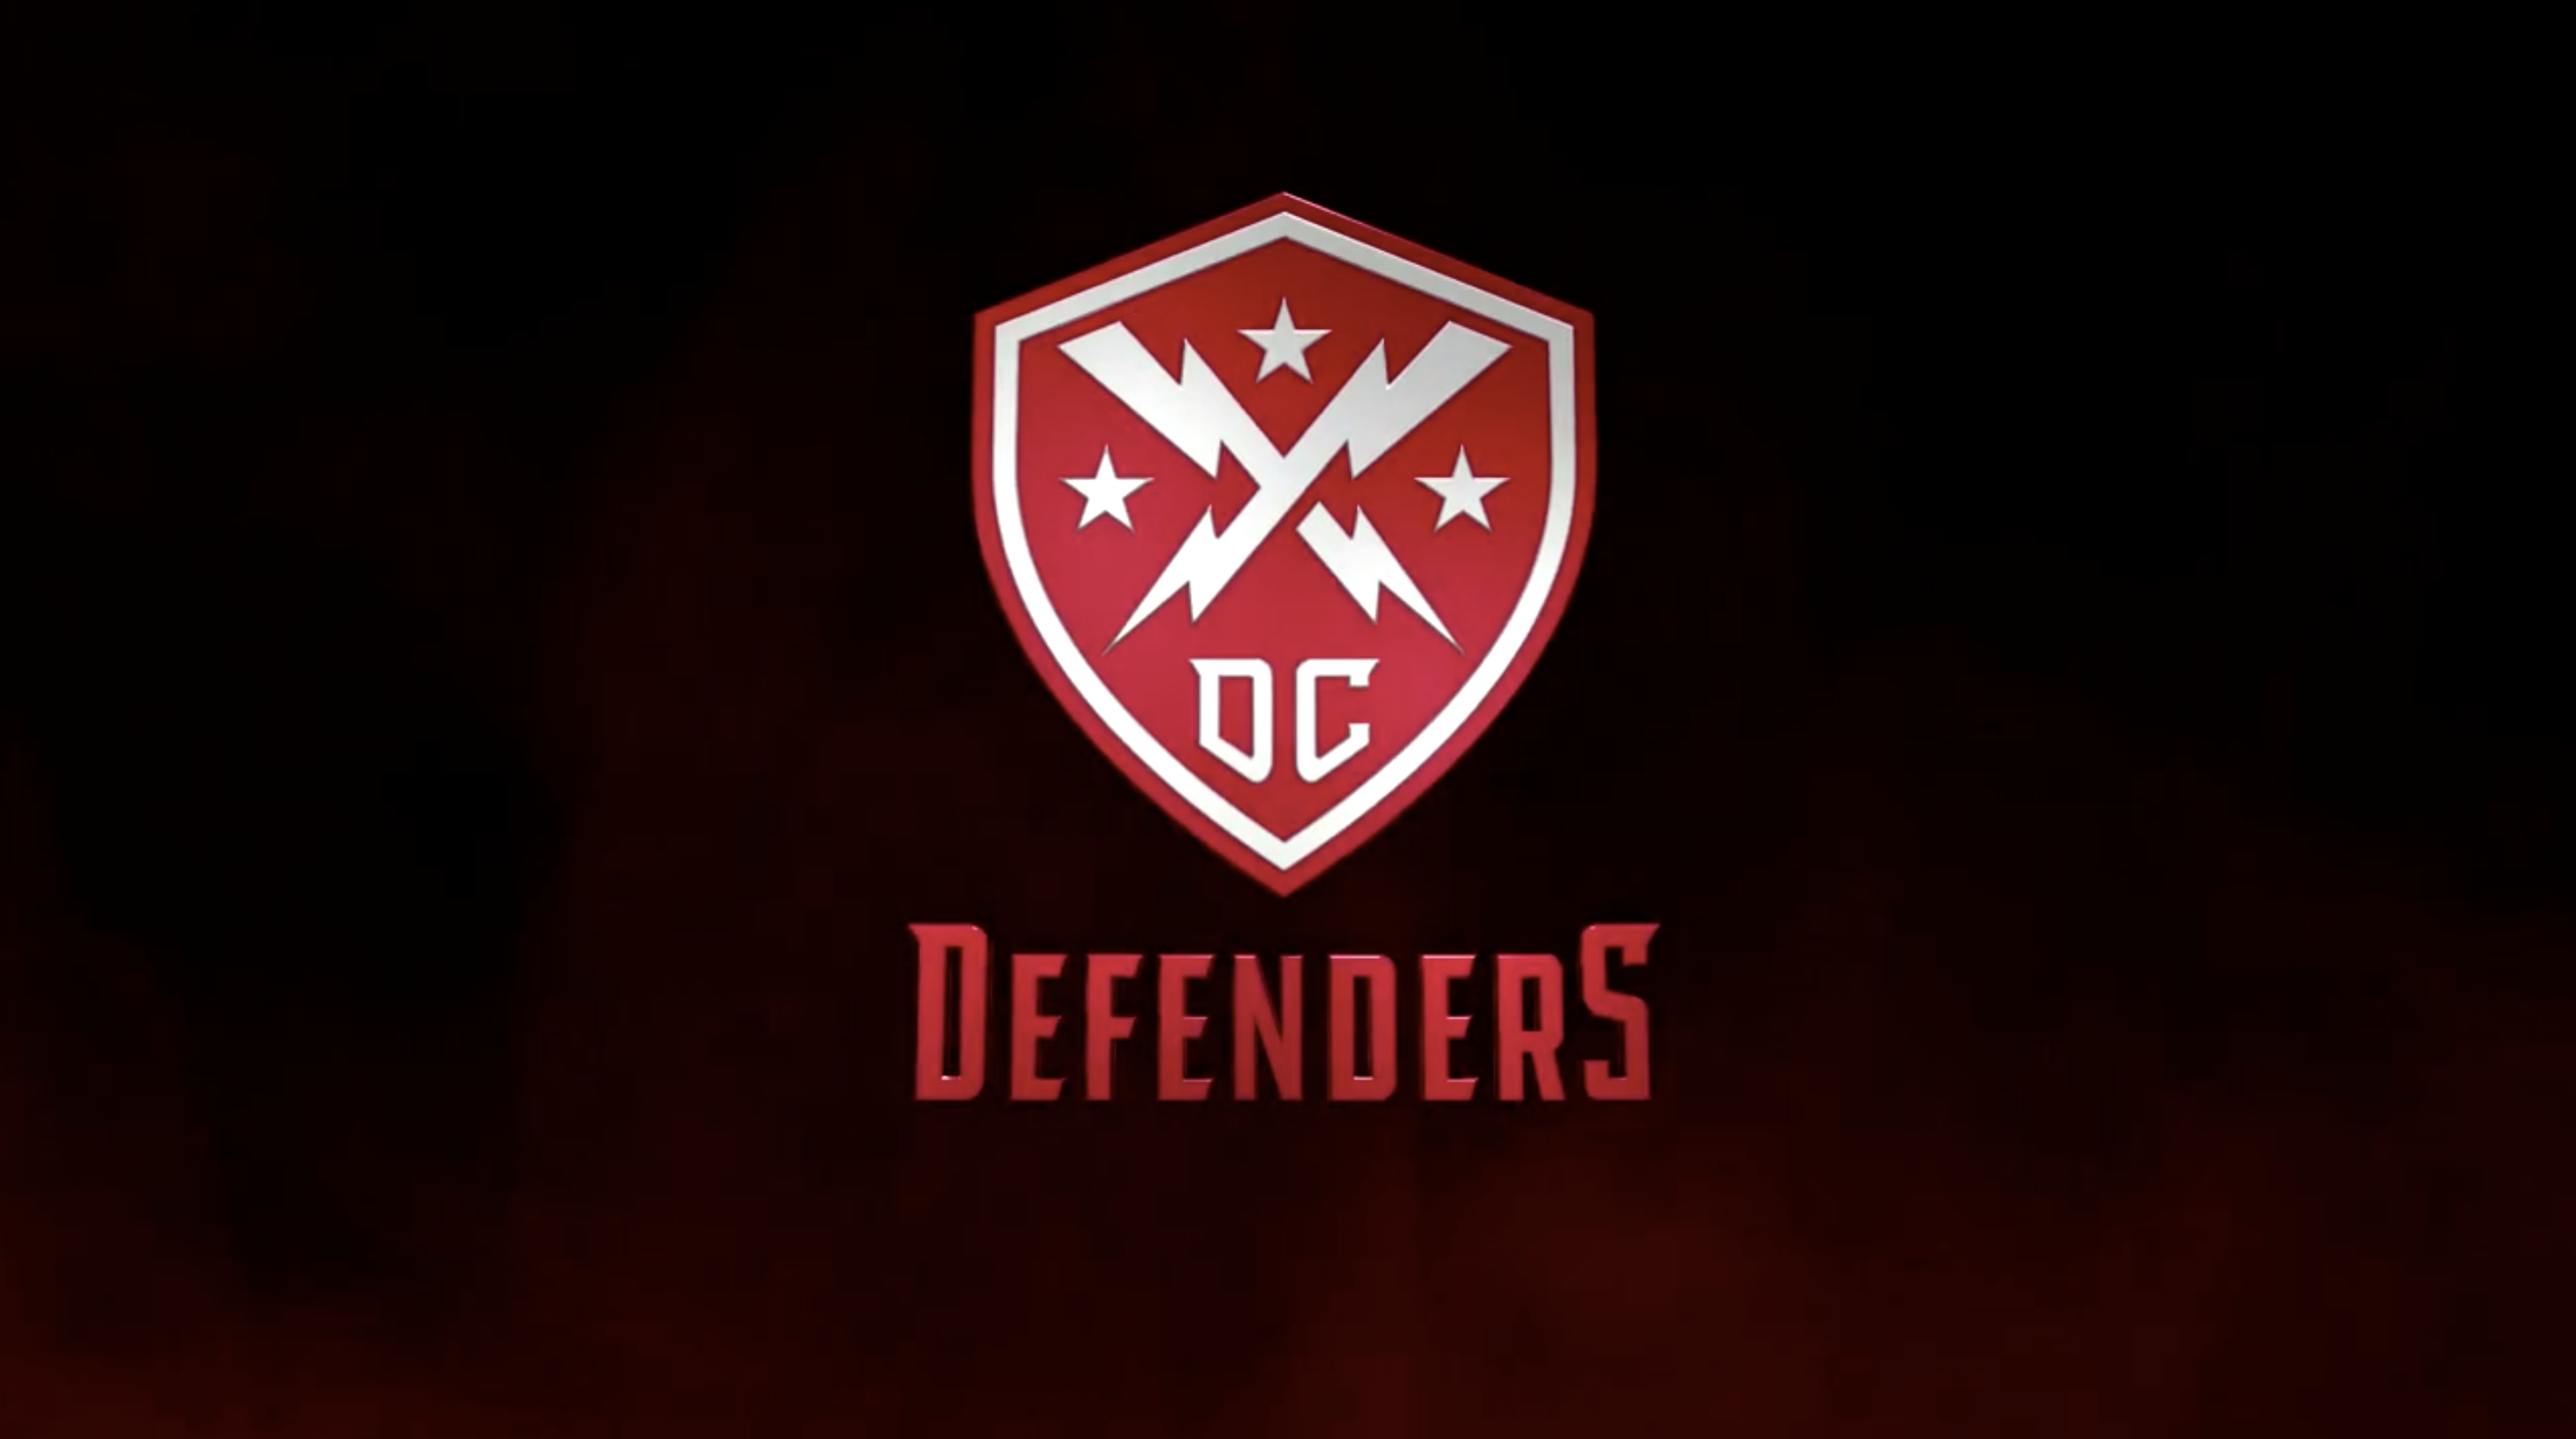 Renegades. Guardians. Defenders. Ranking the Team Names and Logos